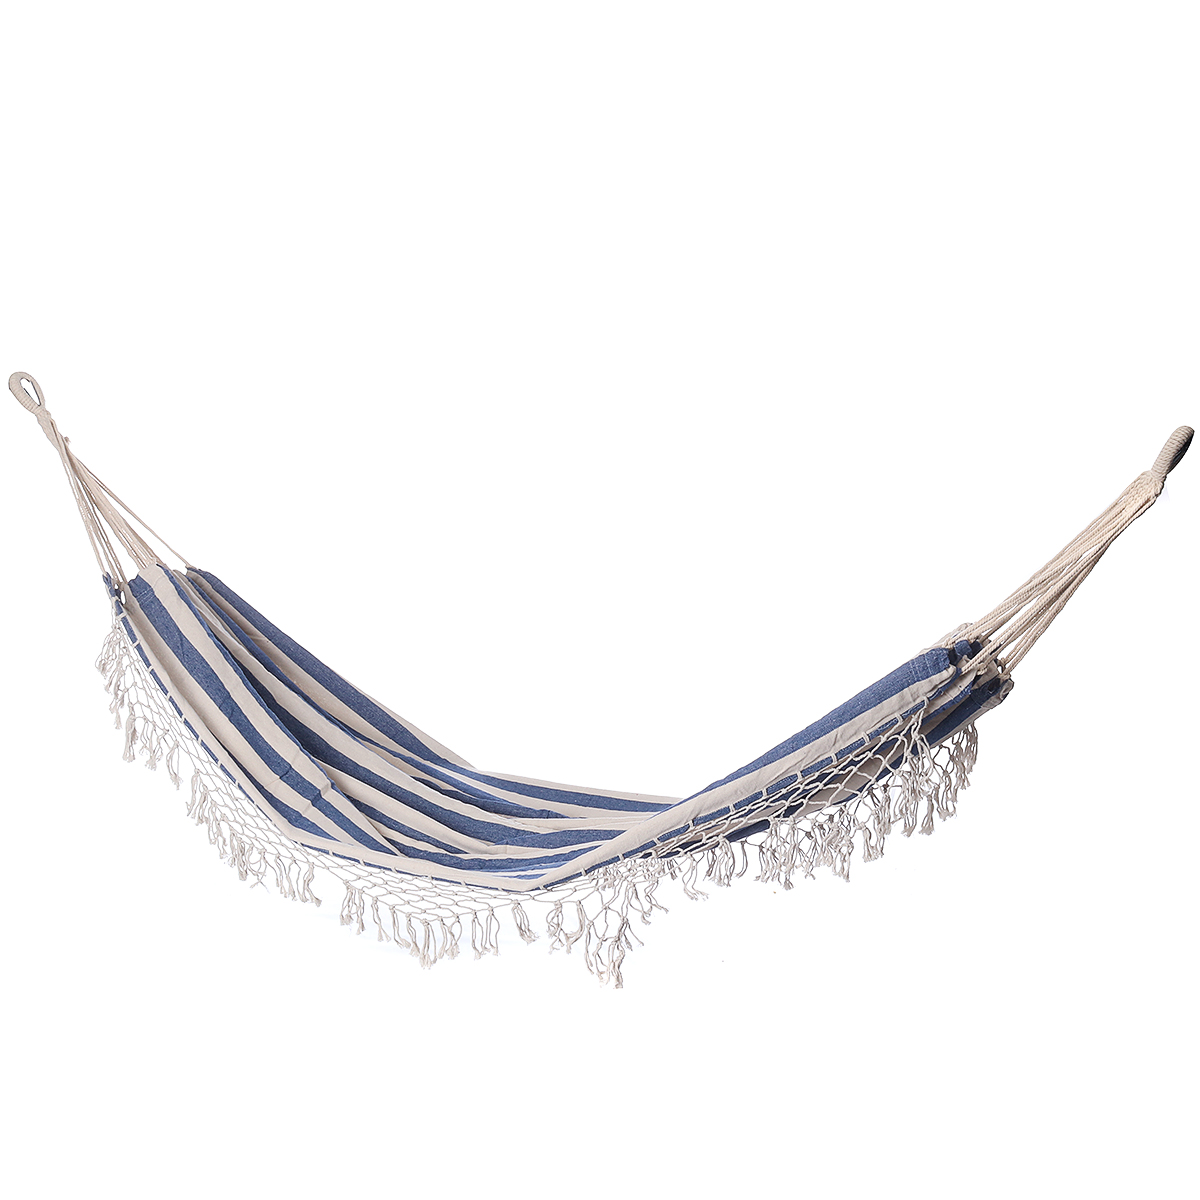 Double-Hammock-2-Person-Extra-Large-Canvas-Cotton-Hammock-for-Patio-Garden-Backyard-Lounging-Outdoor-1696526-10